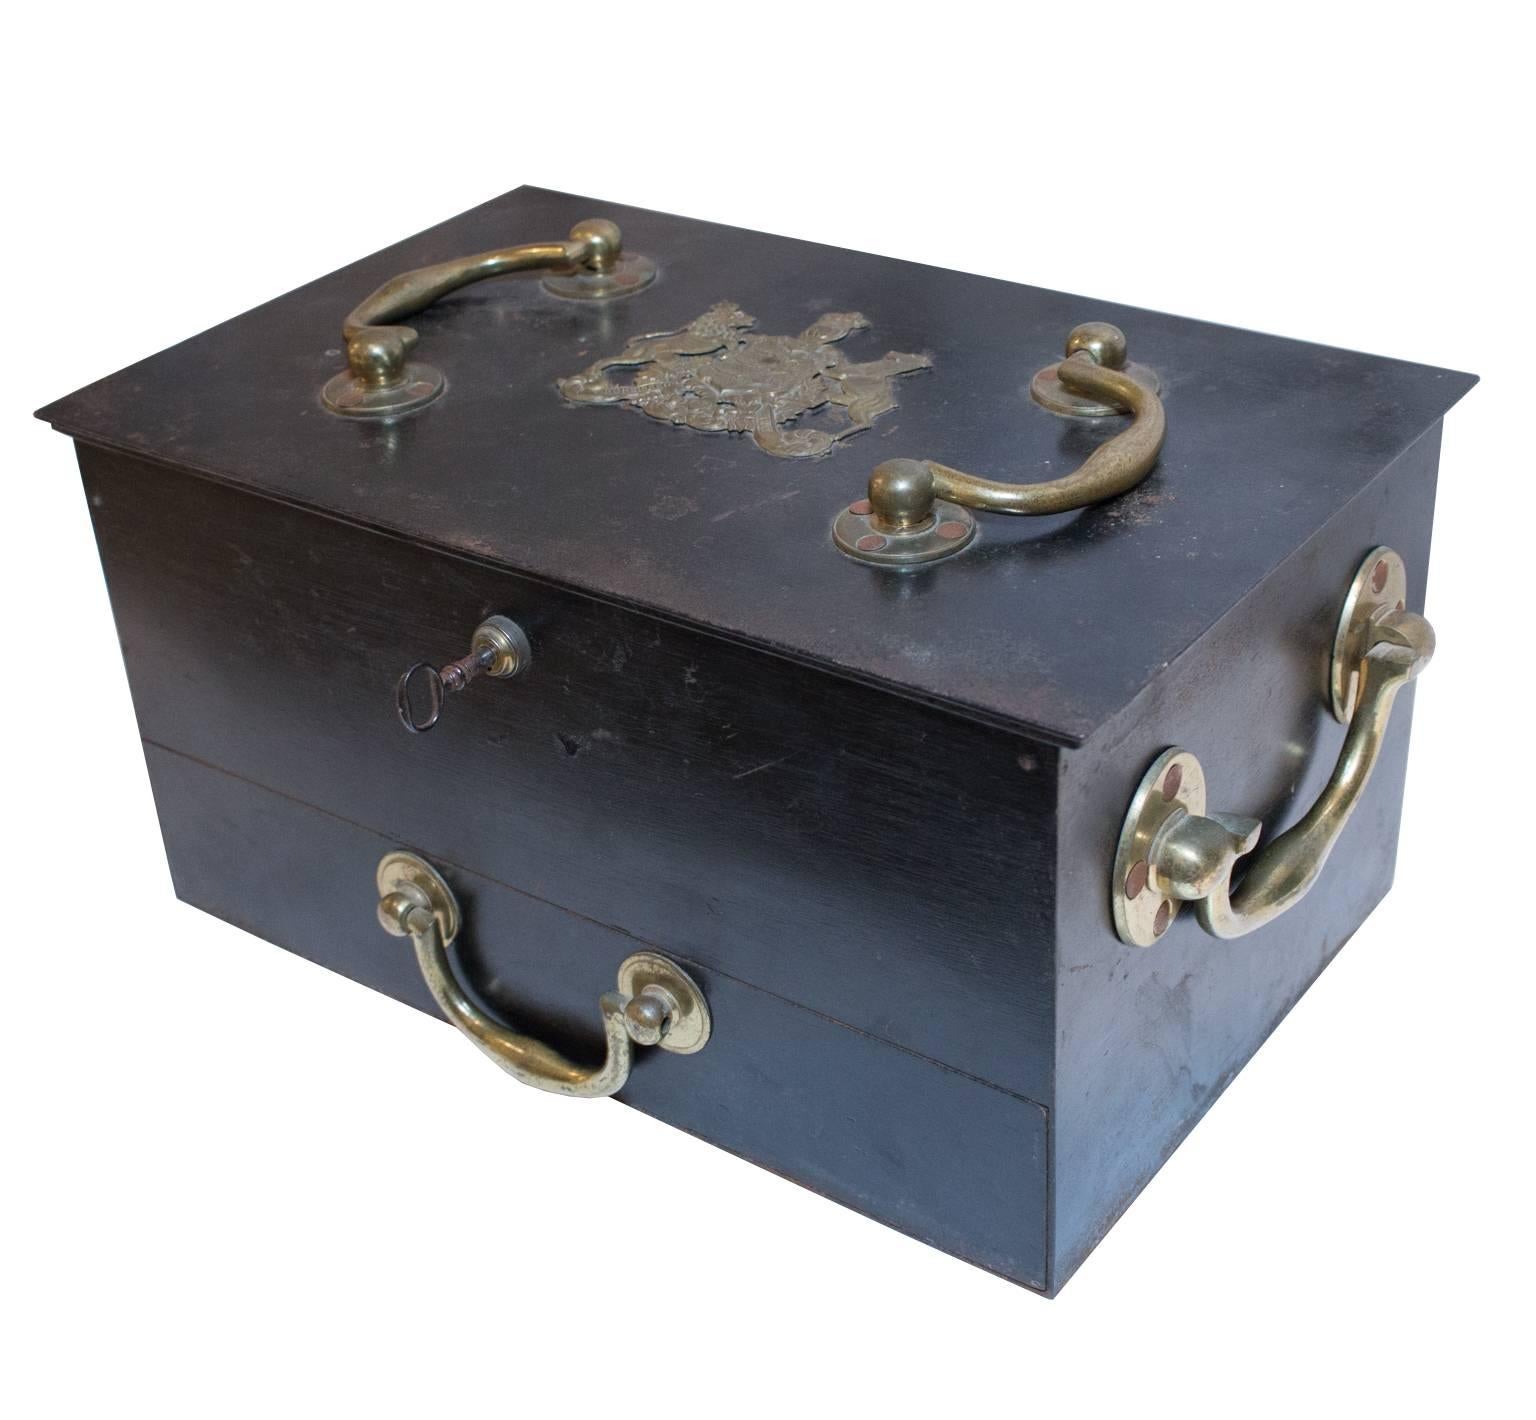 A true treasure discovered during our recent time in Europe, this heavyweight cash box from England features the original key and working lock with a pin that removes to open the lower drawer. Stamped on the inside J.Bramah 124 Piccadilly, London,